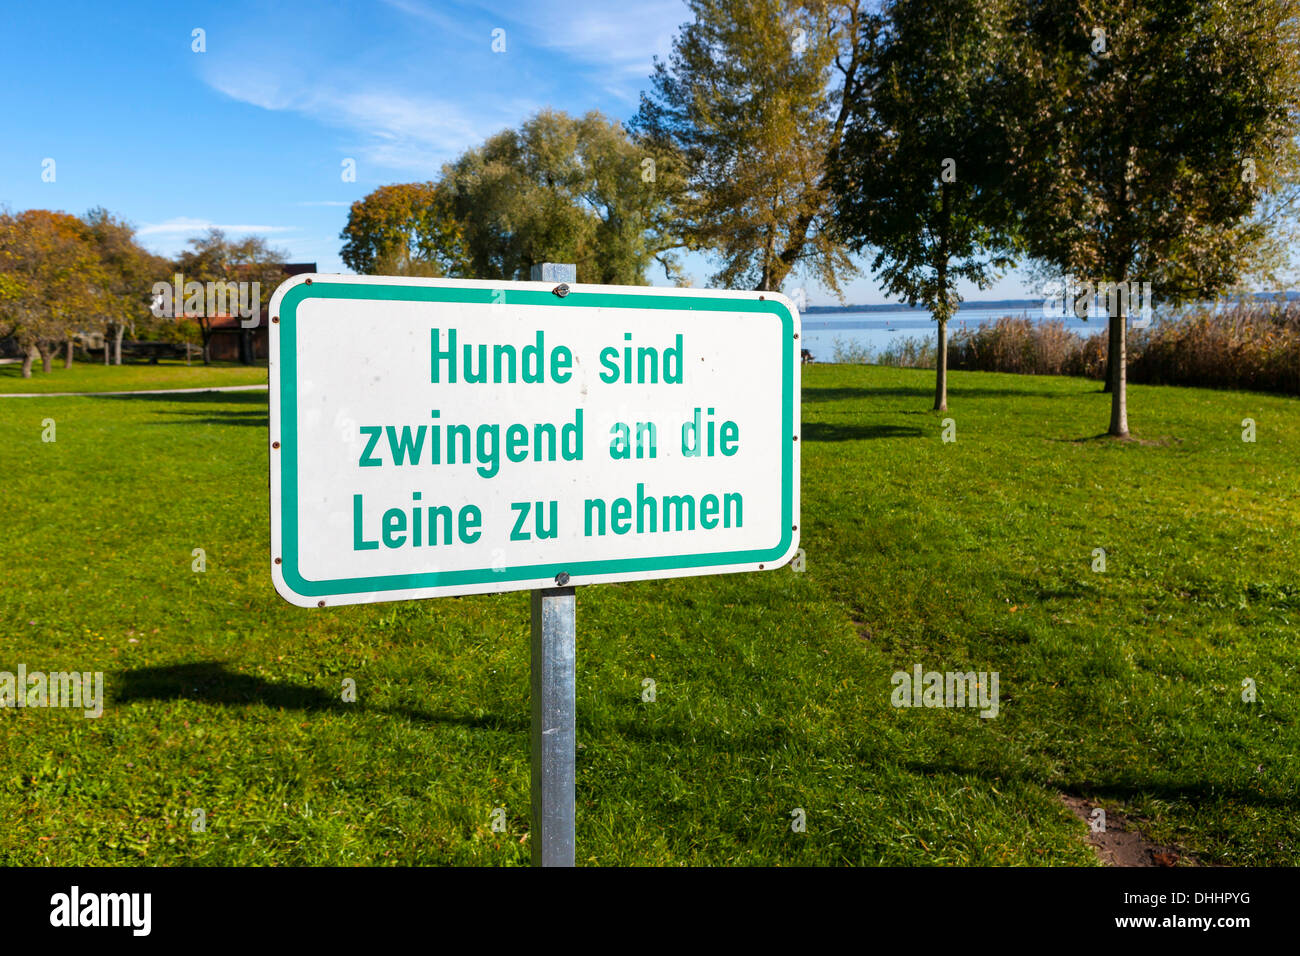 Sign, 'Hunde sind zwingend an die Leine zu nehmen', German for 'dogs must be kept on a leash', Island Frauenchiemsee or Stock Photo